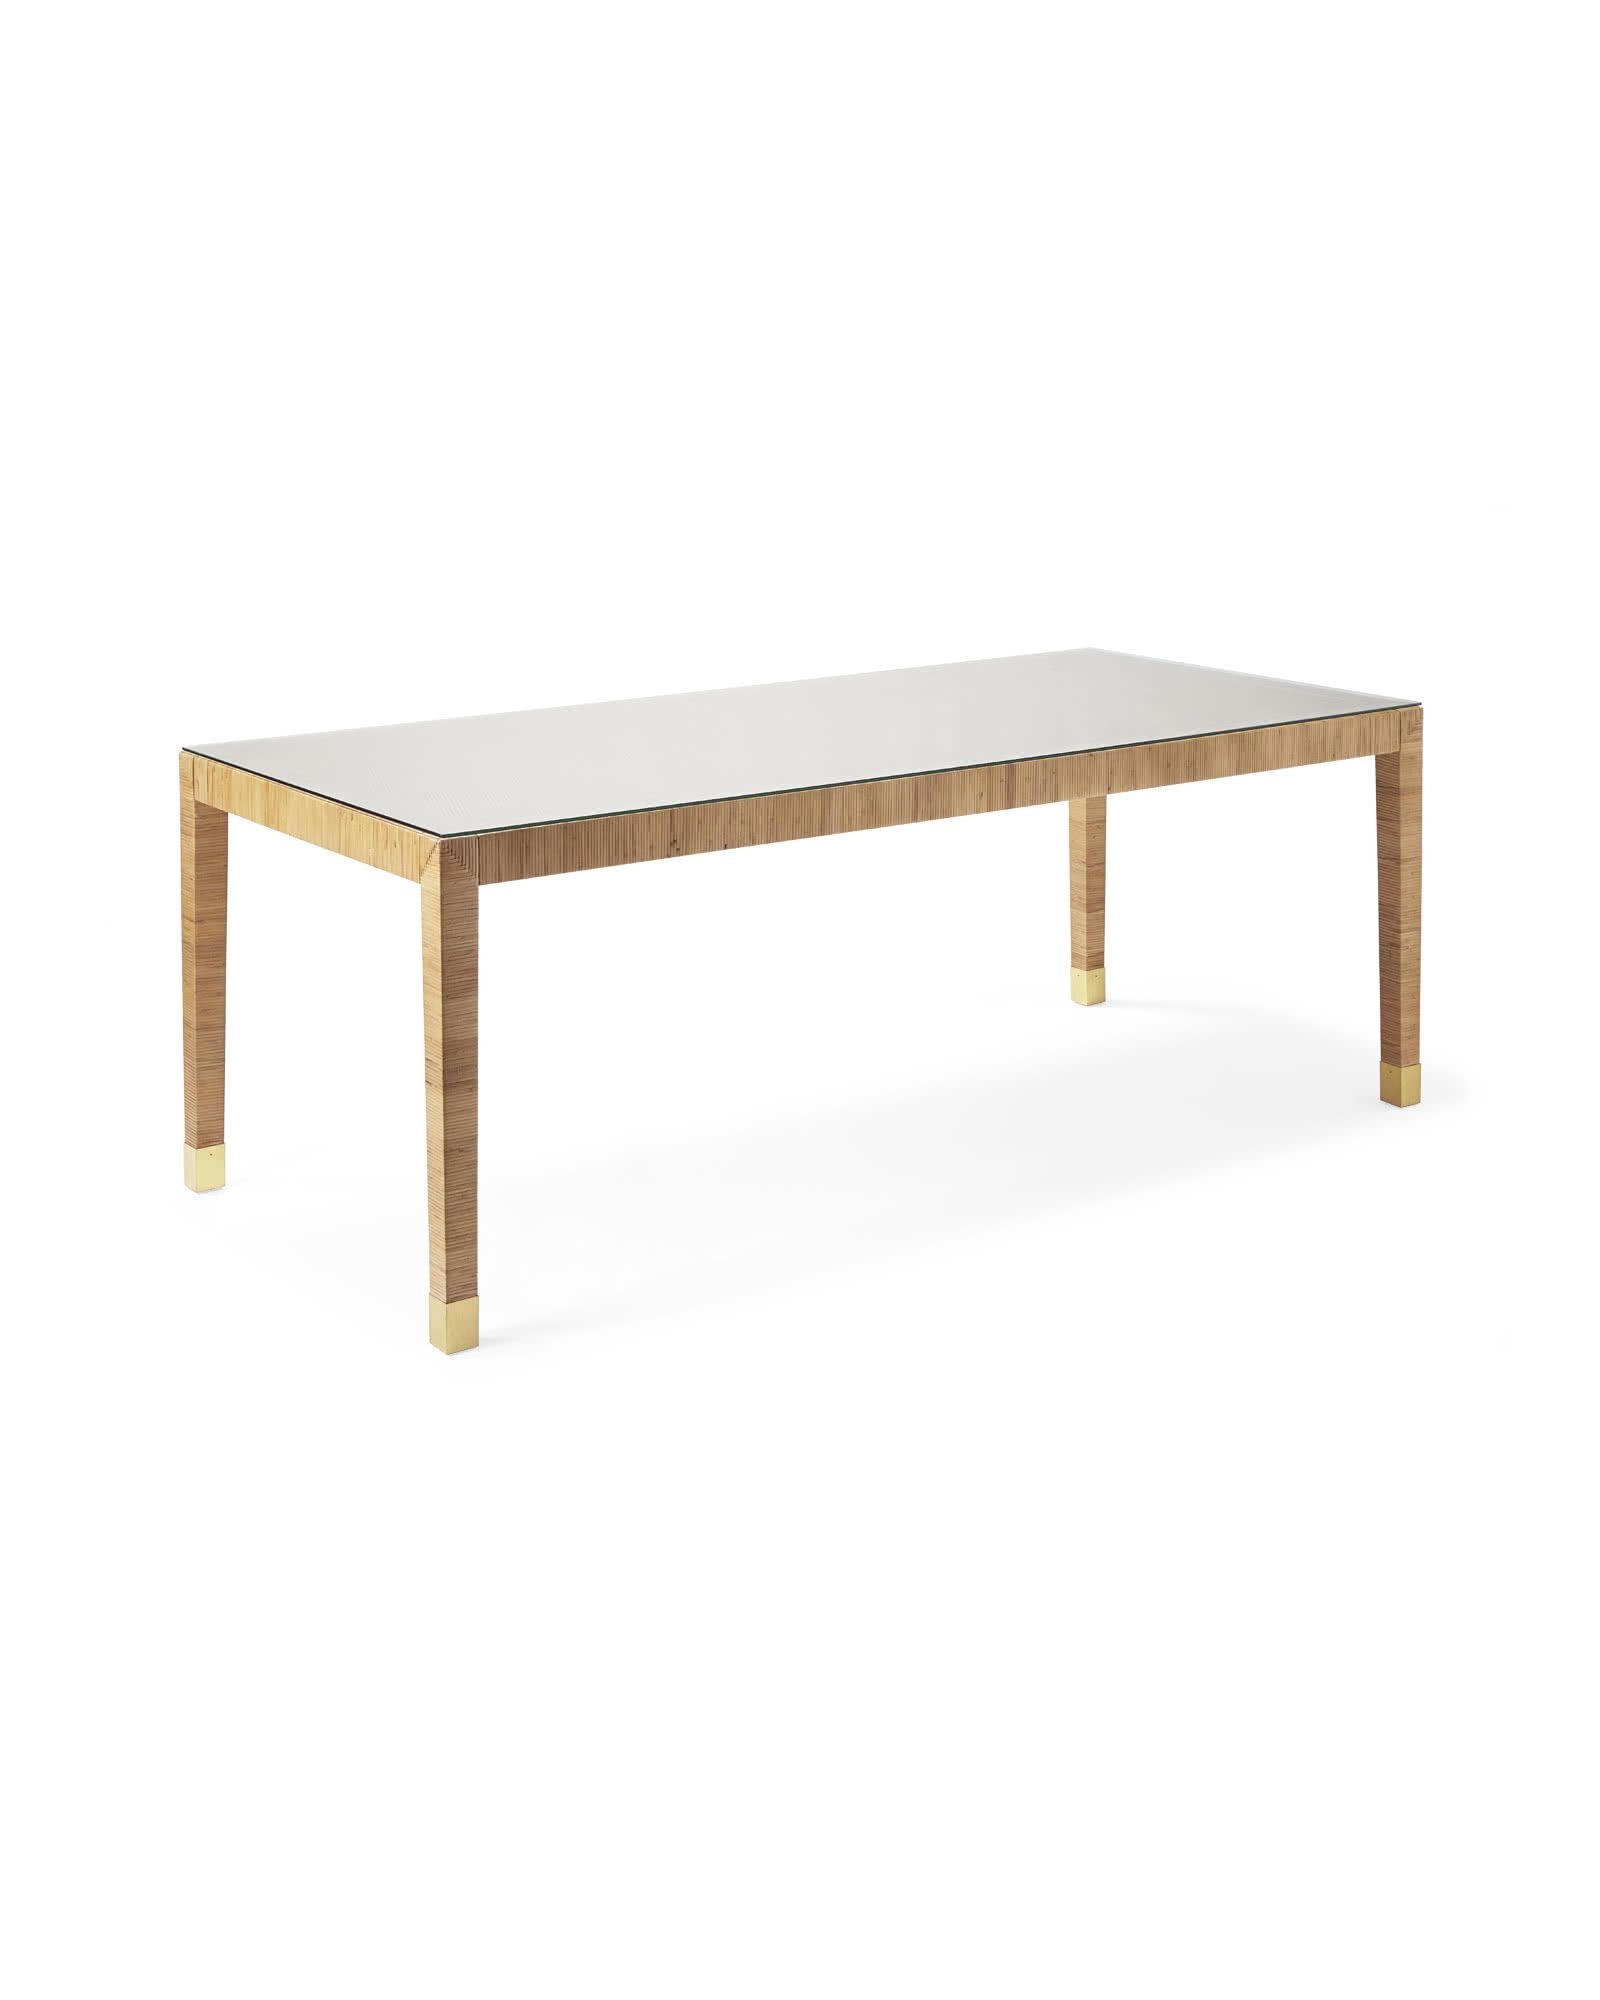 Balboa Dining Table | Serena and Lily